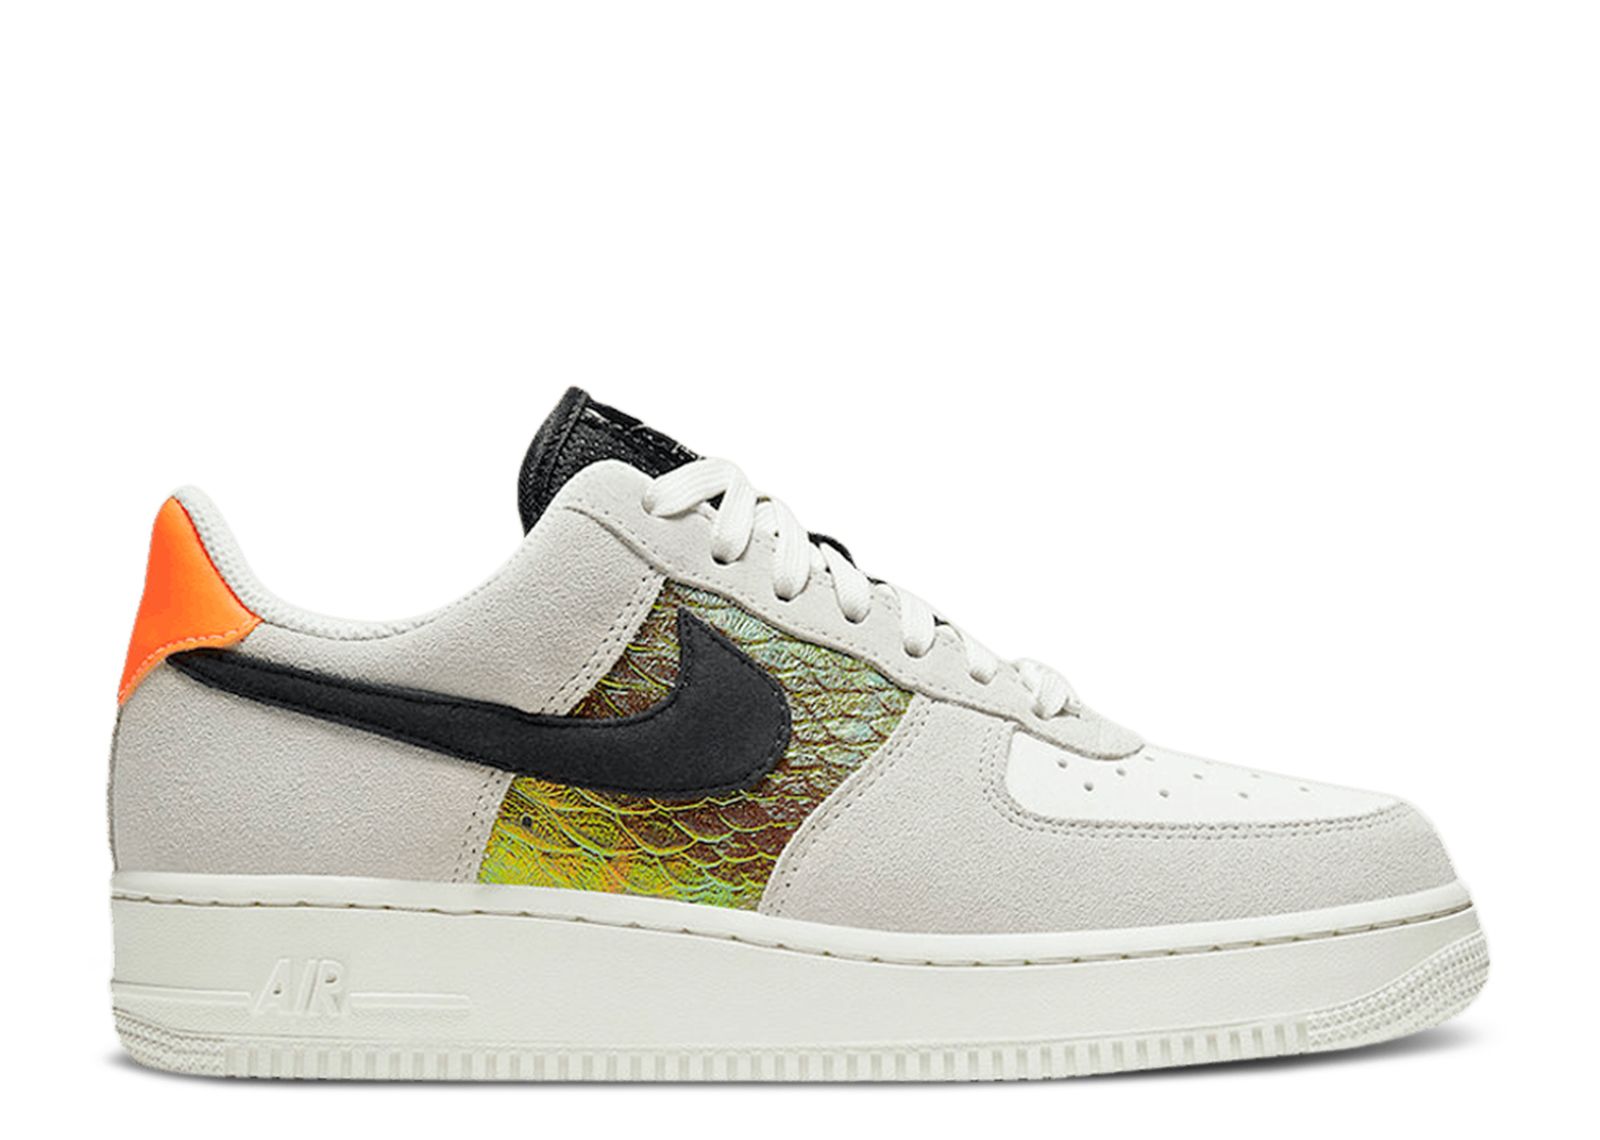 Second Chance - Nike Air Force 1 Low Iridescent Snakeskin - 36 | NEW